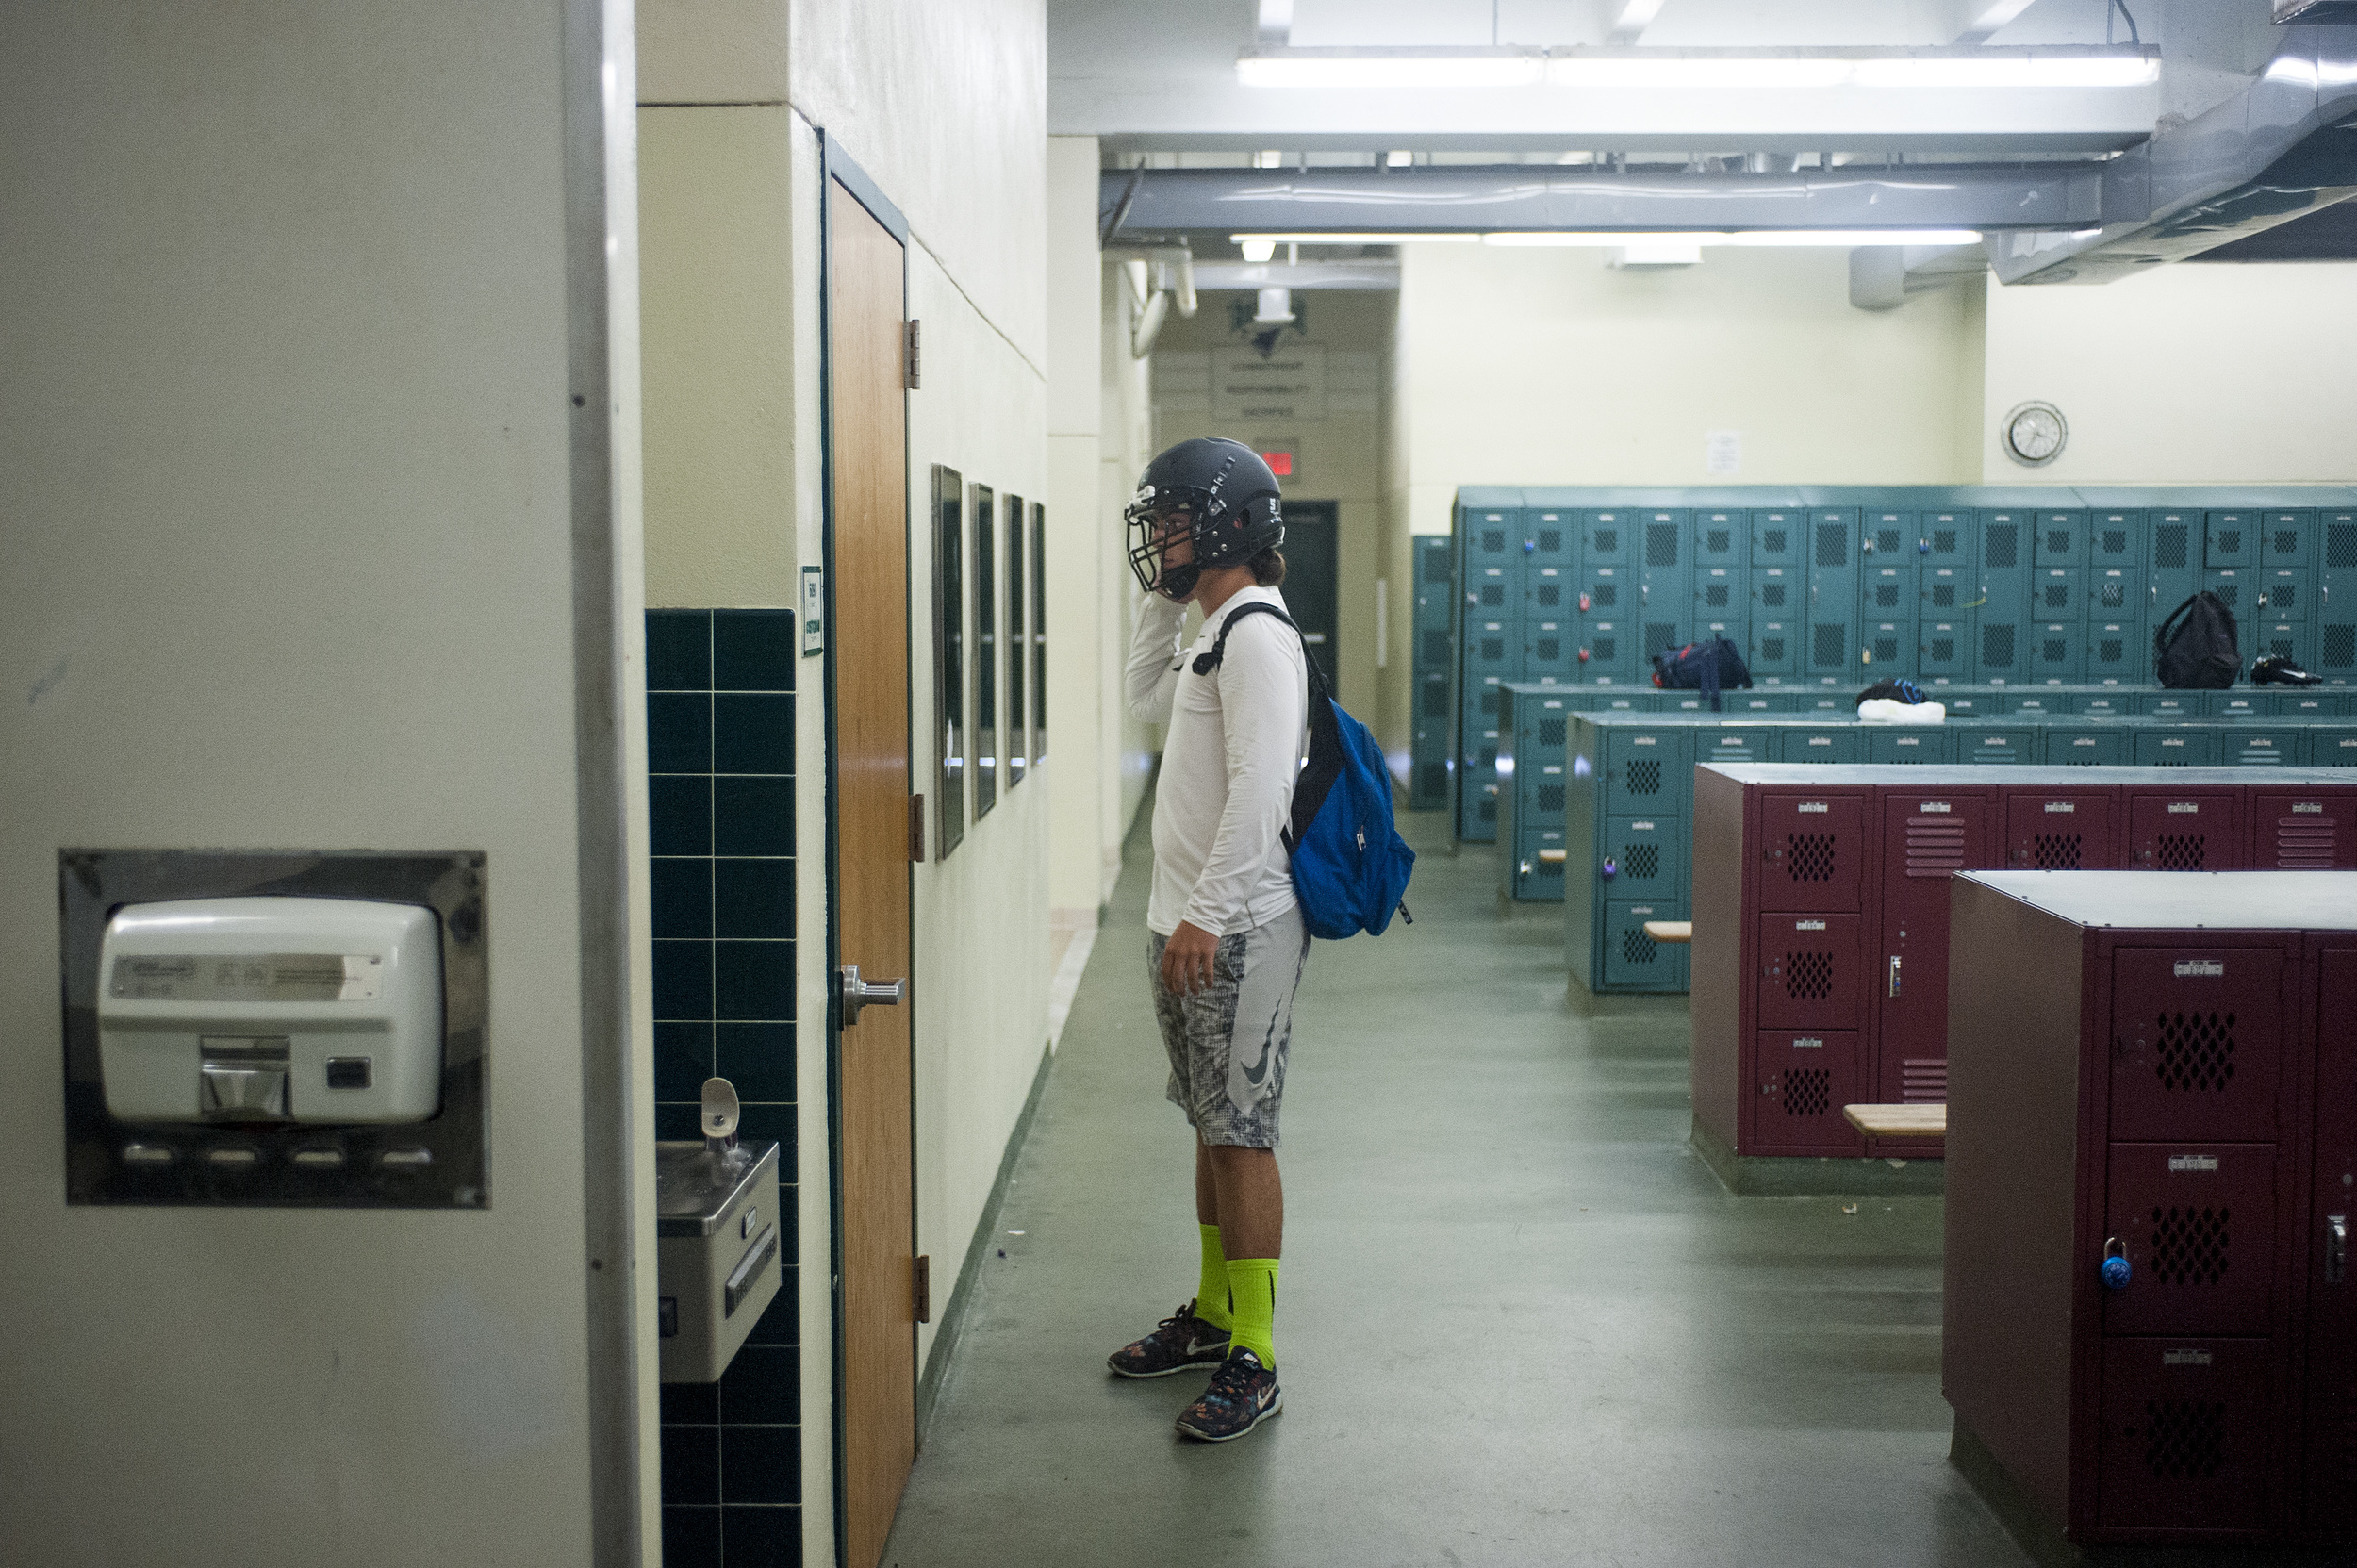  Flanagan high school junior linebacker Lucas Vallee looks at himself with his helmet on in the mirror inside the locker room prior to heading out to the field for the first practice of the high school football season at Flanagan High School on Monda